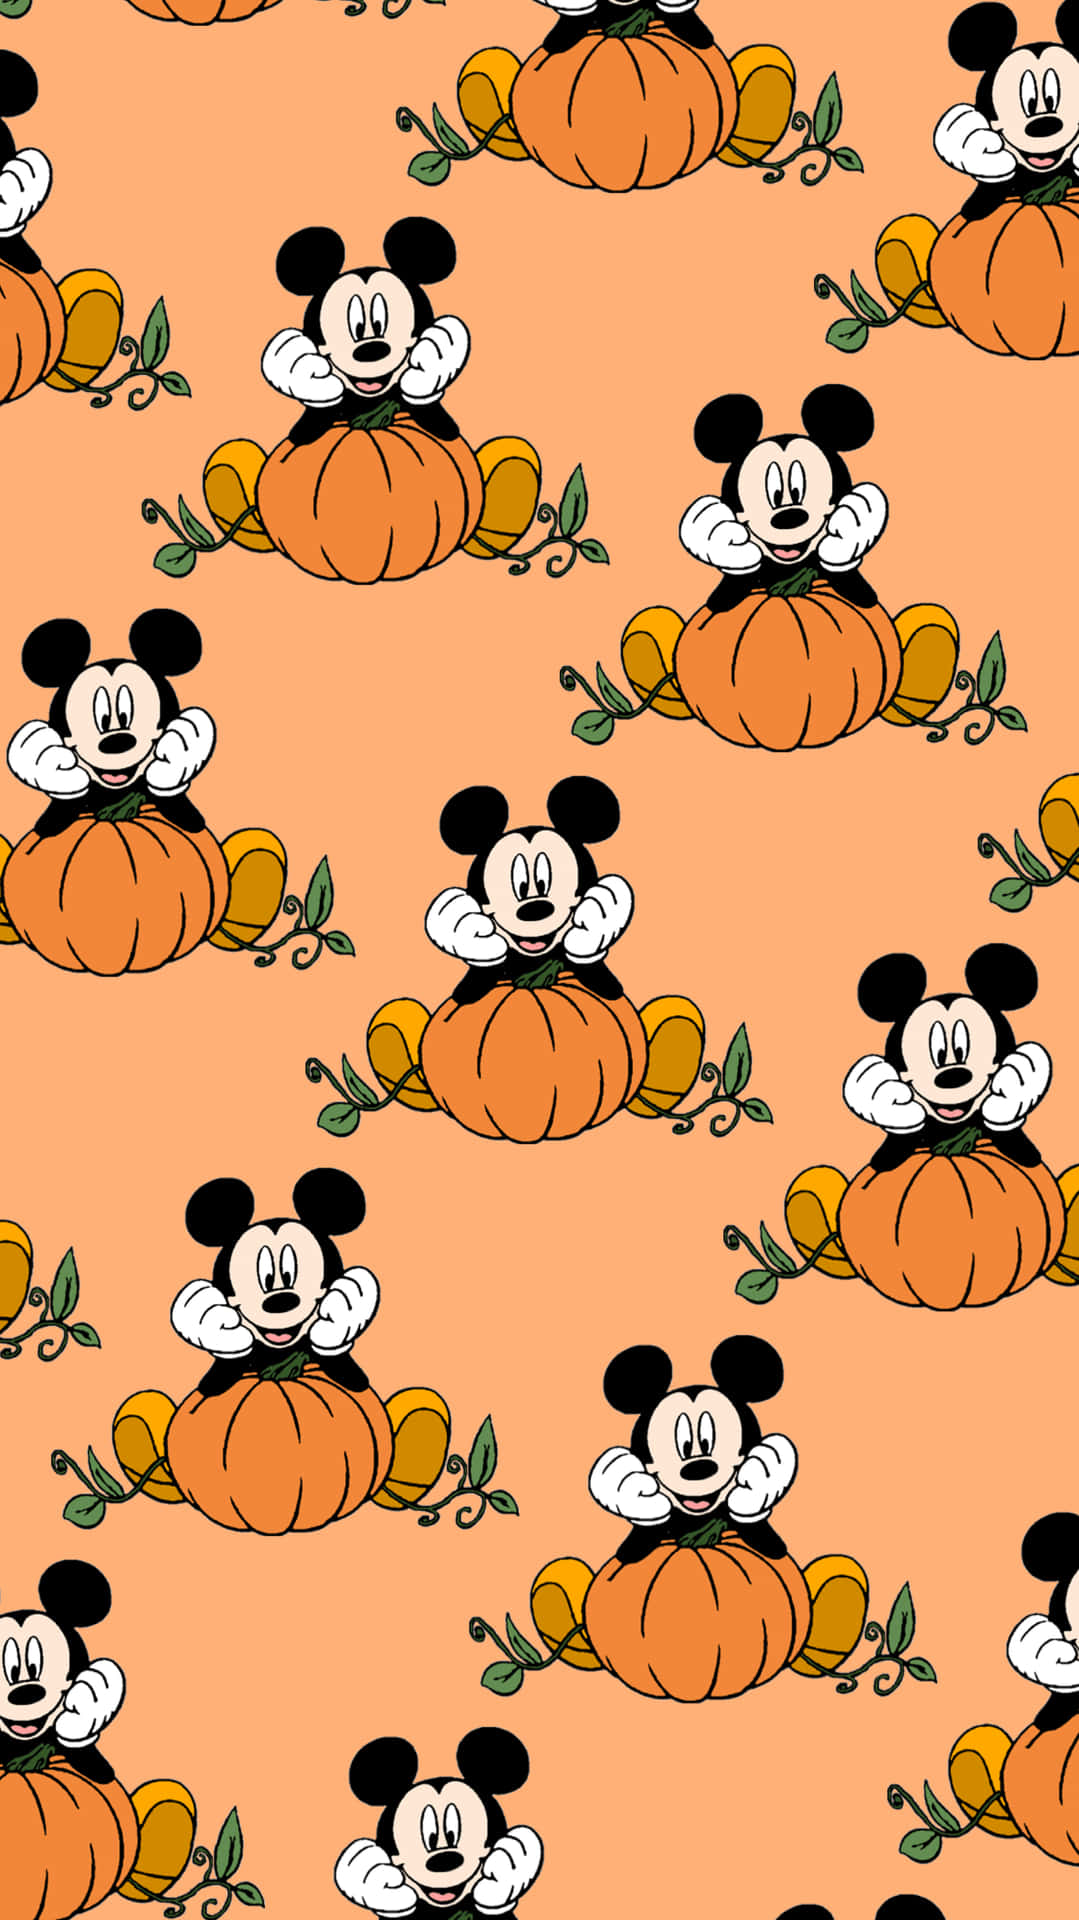 Halloween Cute Micky Mouse With Pumpkins Picture